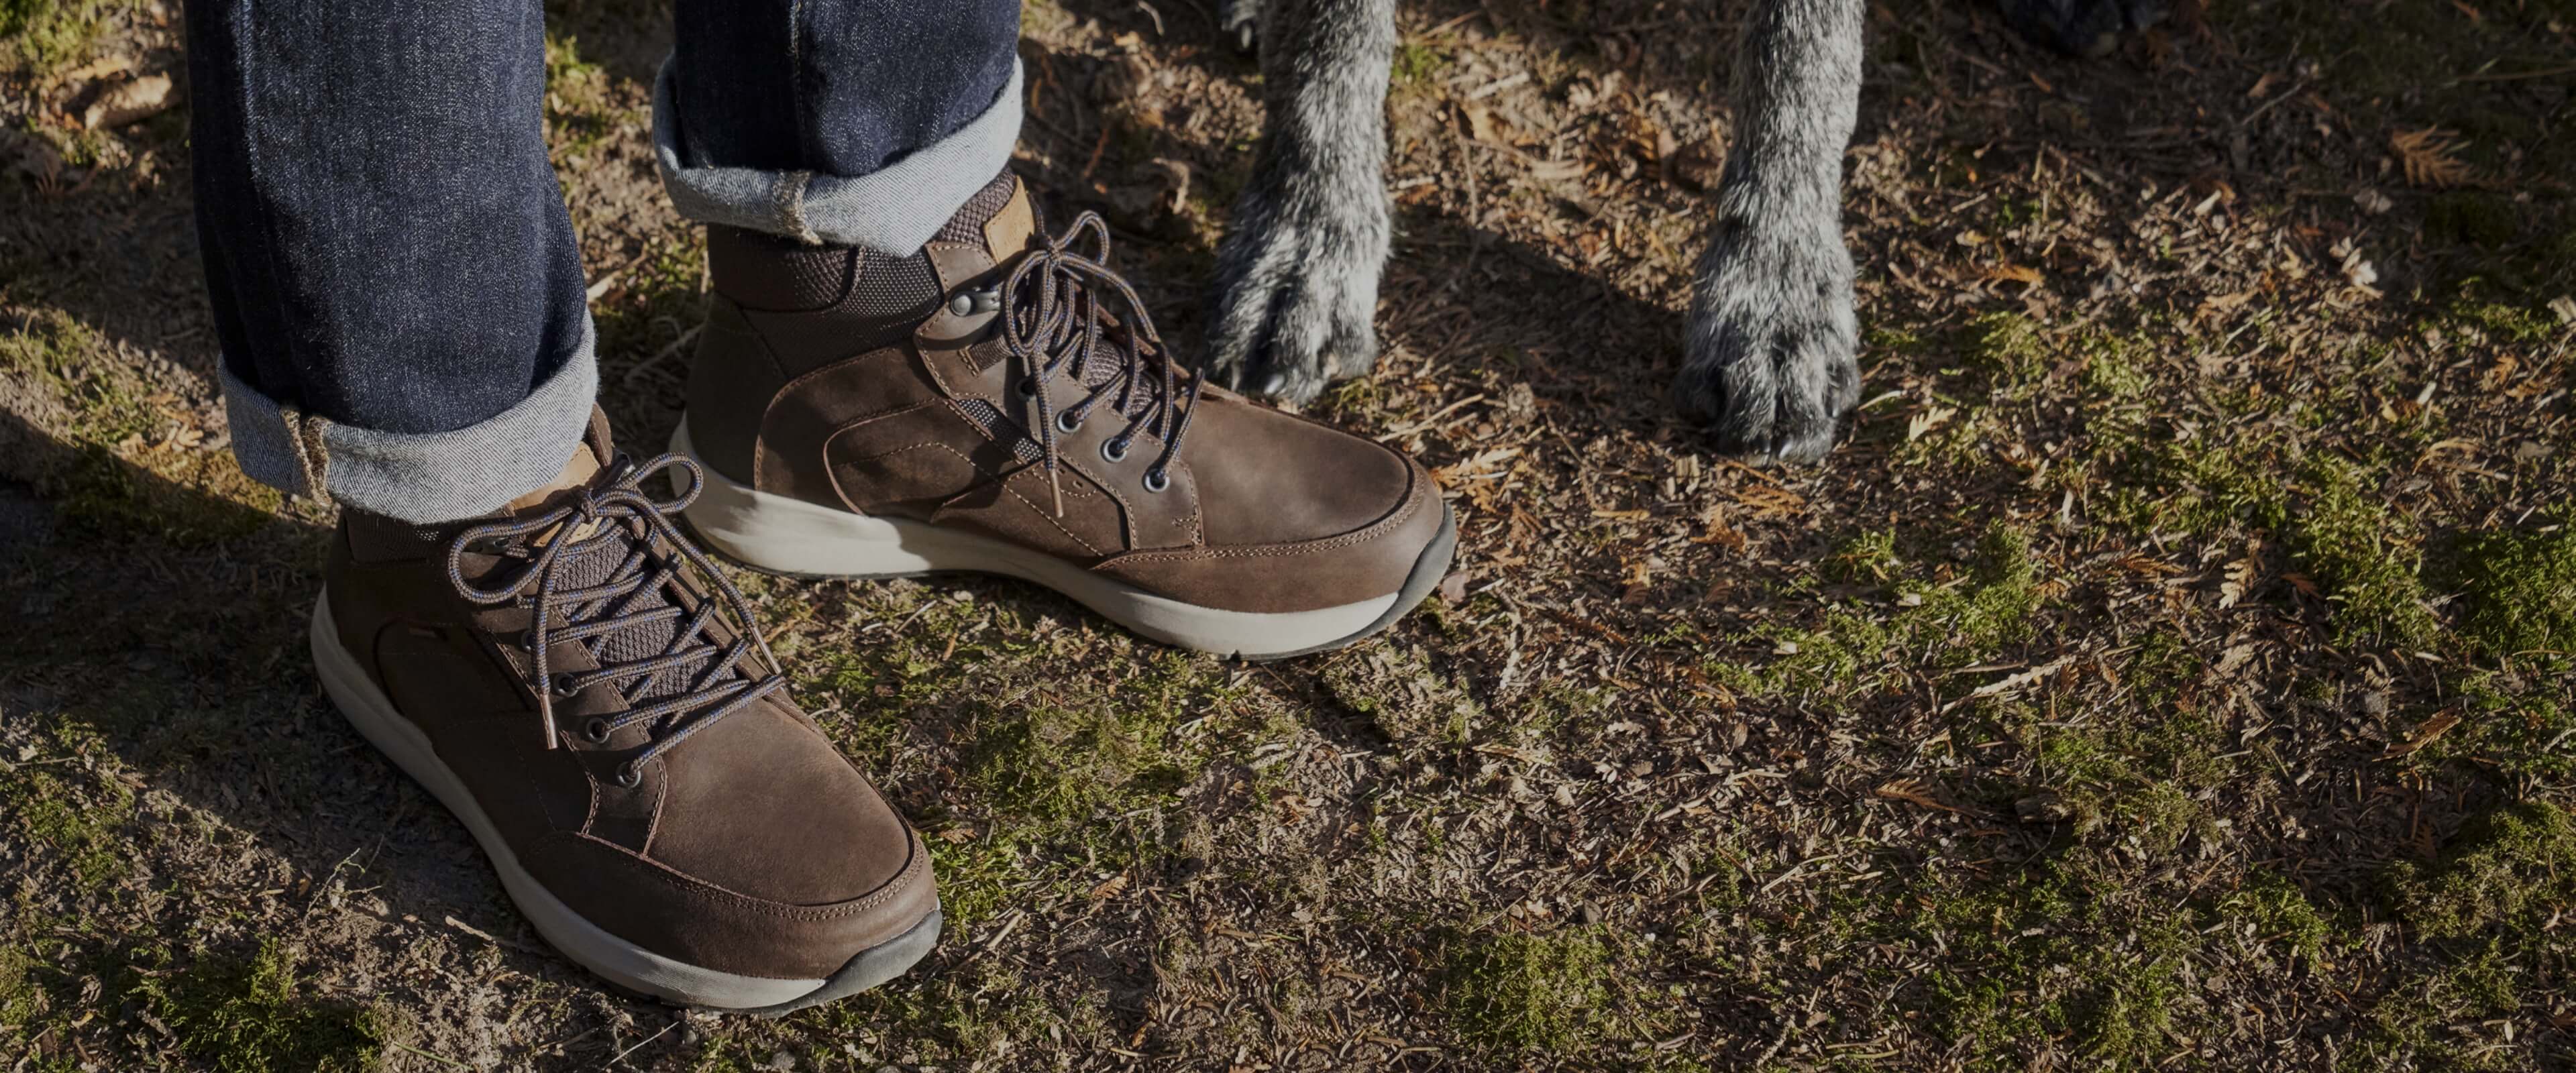 Click to shop Nunn Bush new arrivals. Image features the Excursion chukka in brown.